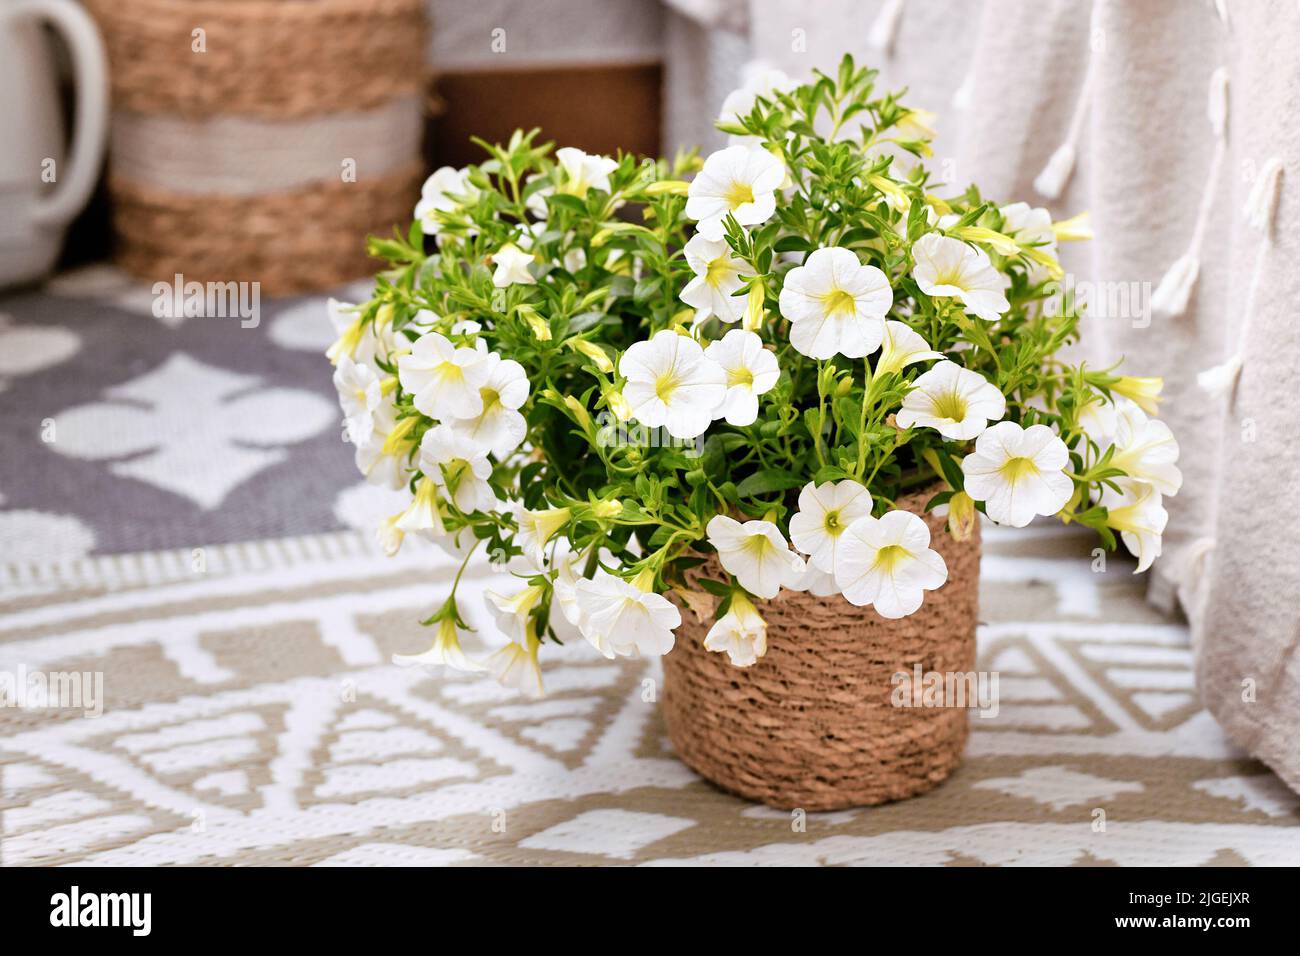 Calibrachoa plant with white flowers in basket flower pot Stock Photo